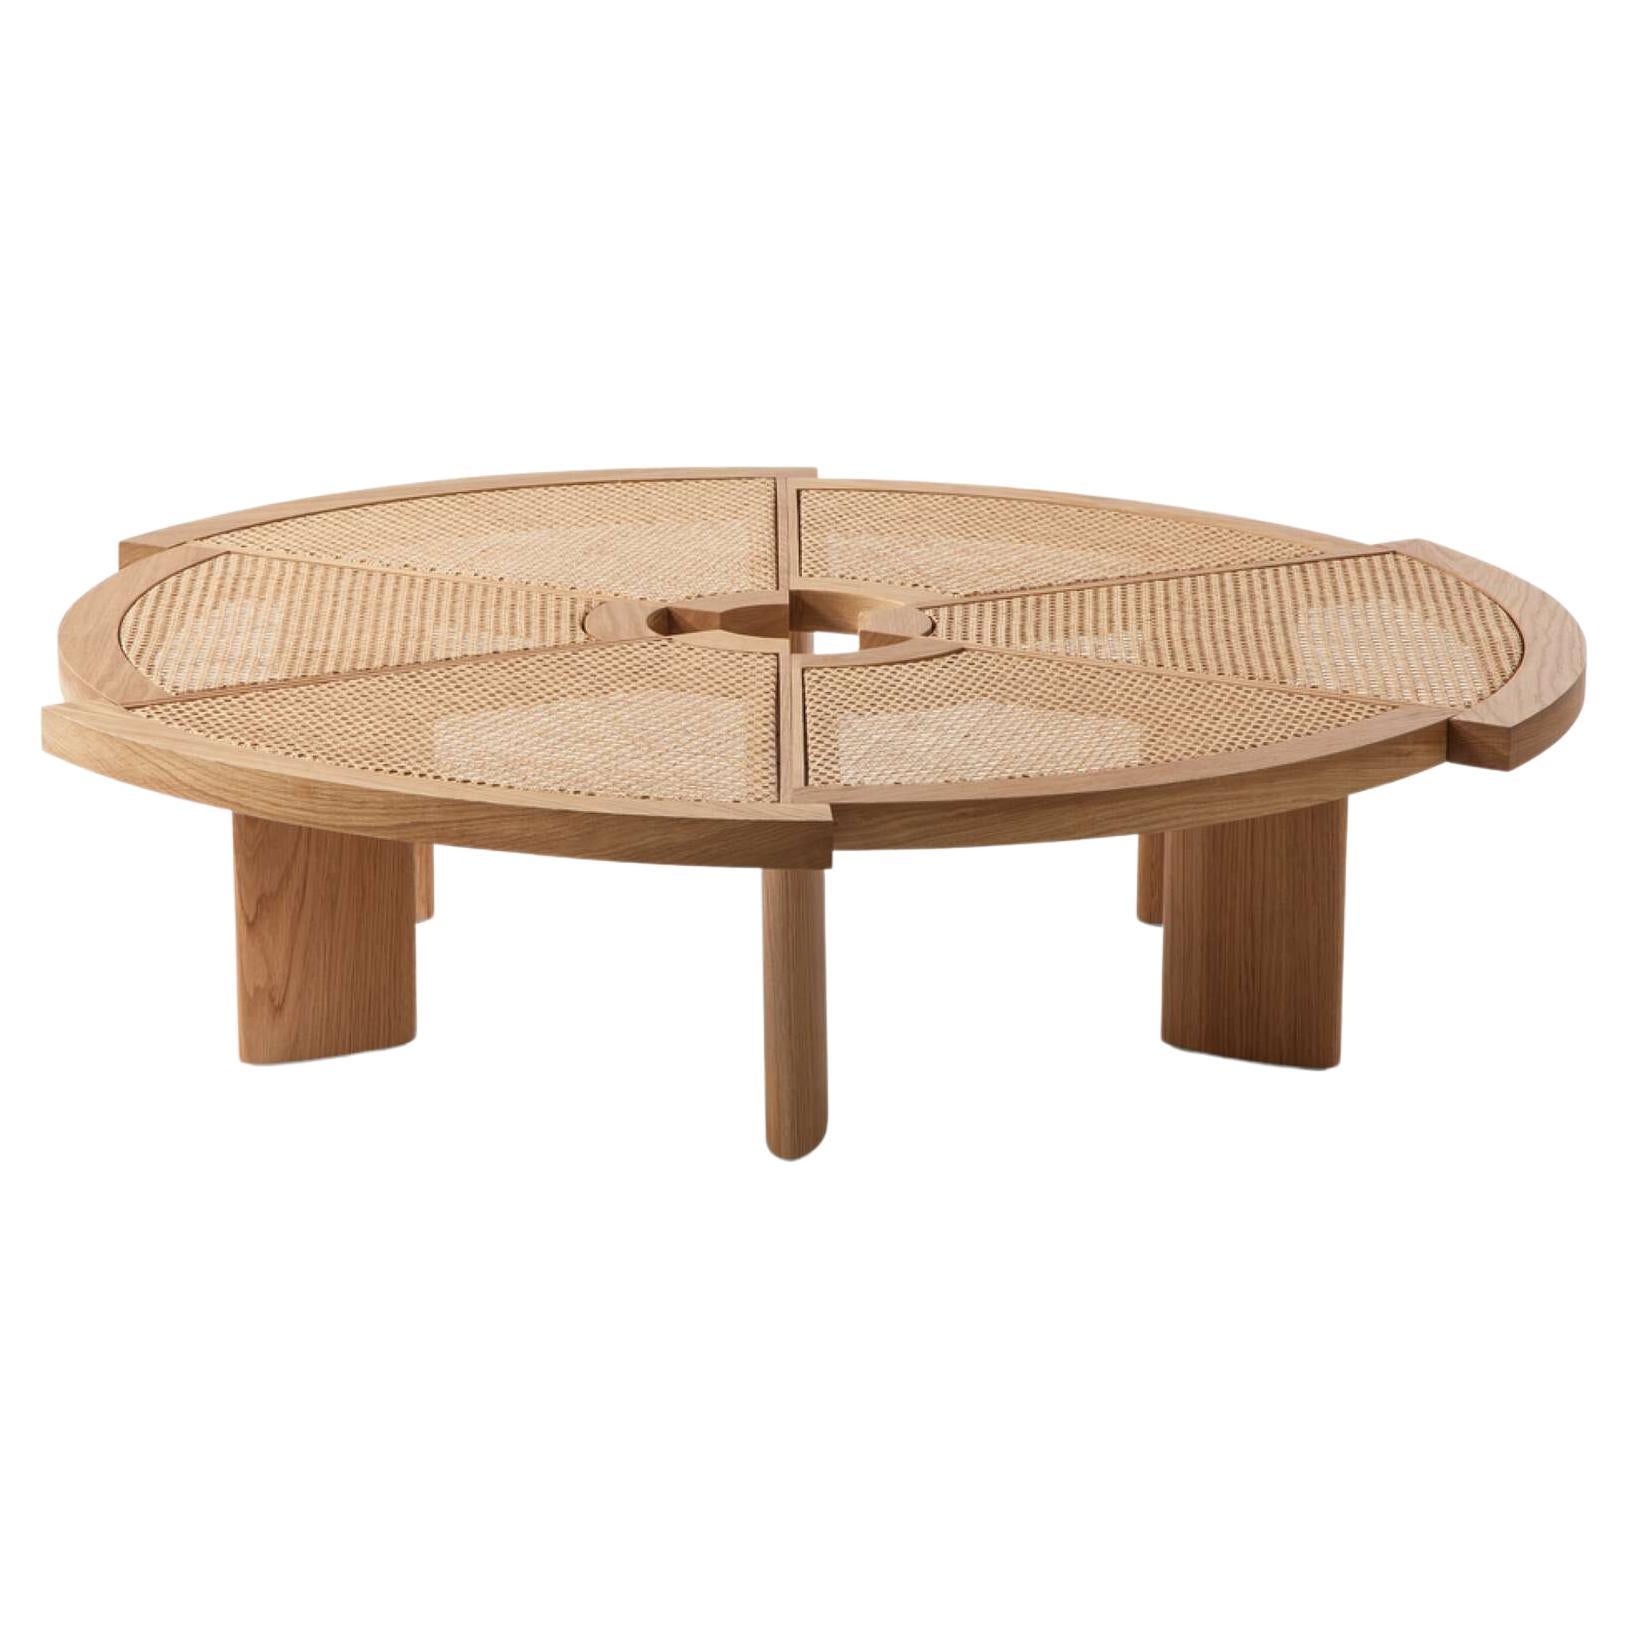 Base and frame in oak. Price is per table and varies dependent on the choice of material

Table designed by Charlotte Perriand in 1937. Relaunched in 2020. Manufactured by Cassina in Italy